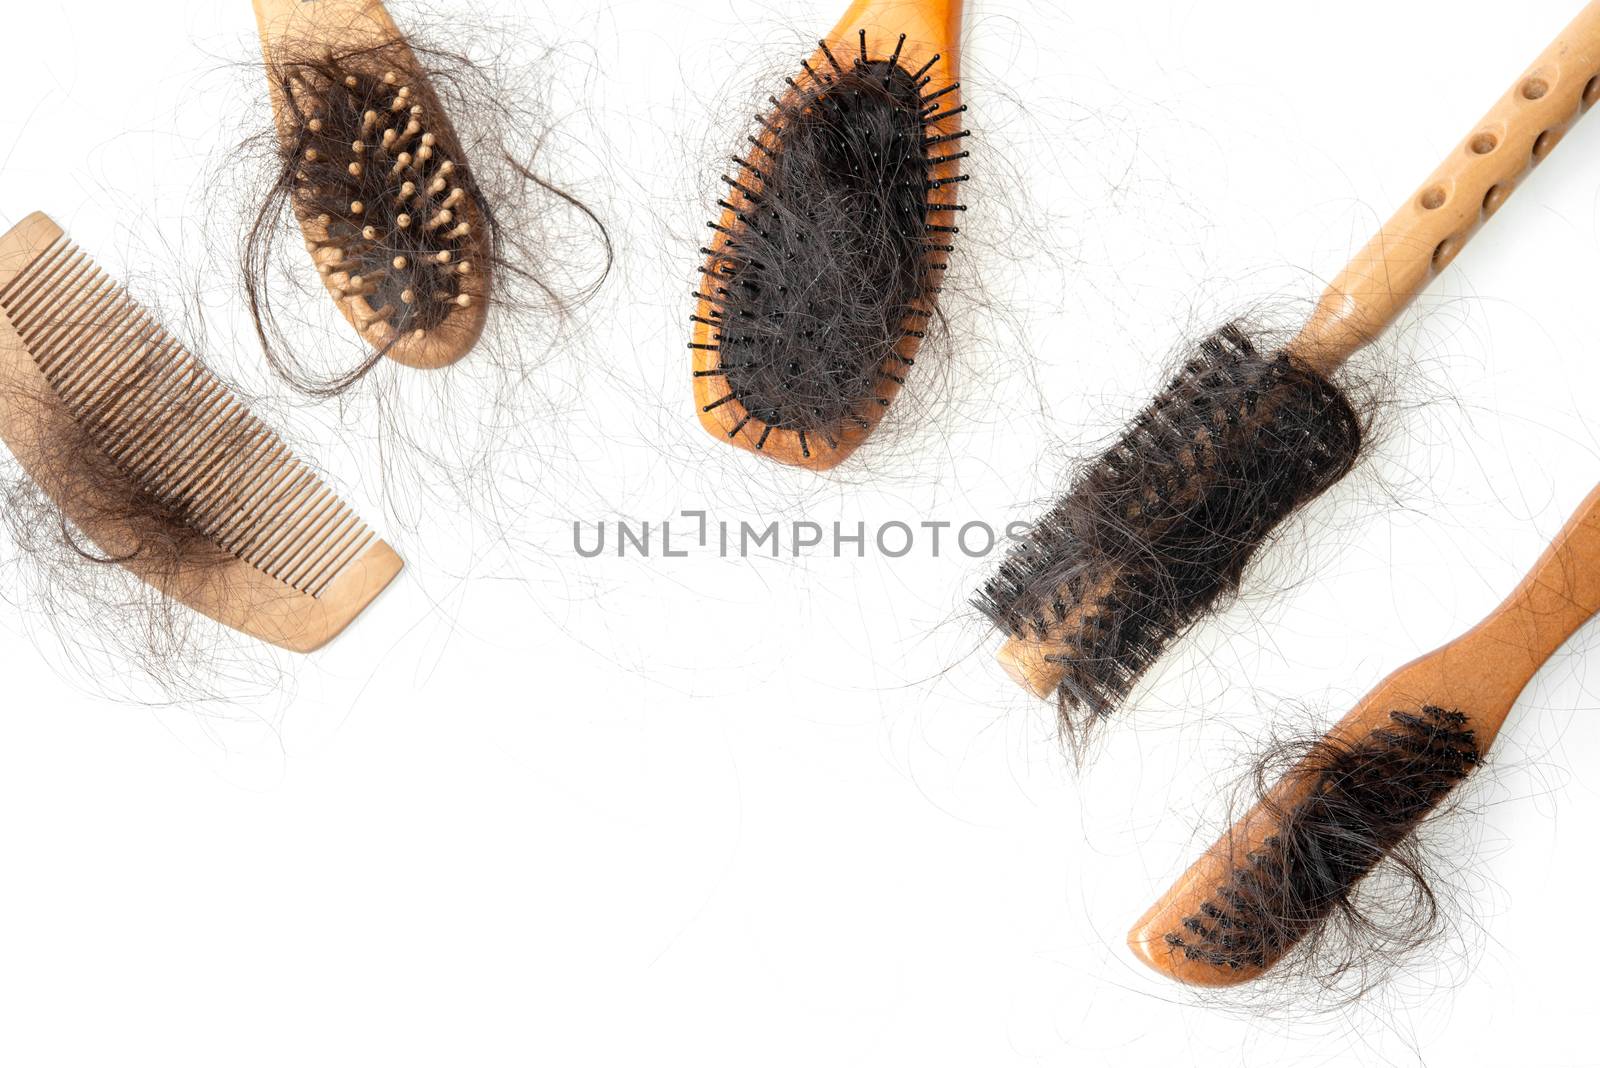 Collection set of brushes with lost hair on it, copy space on bottom, isolated on white background.